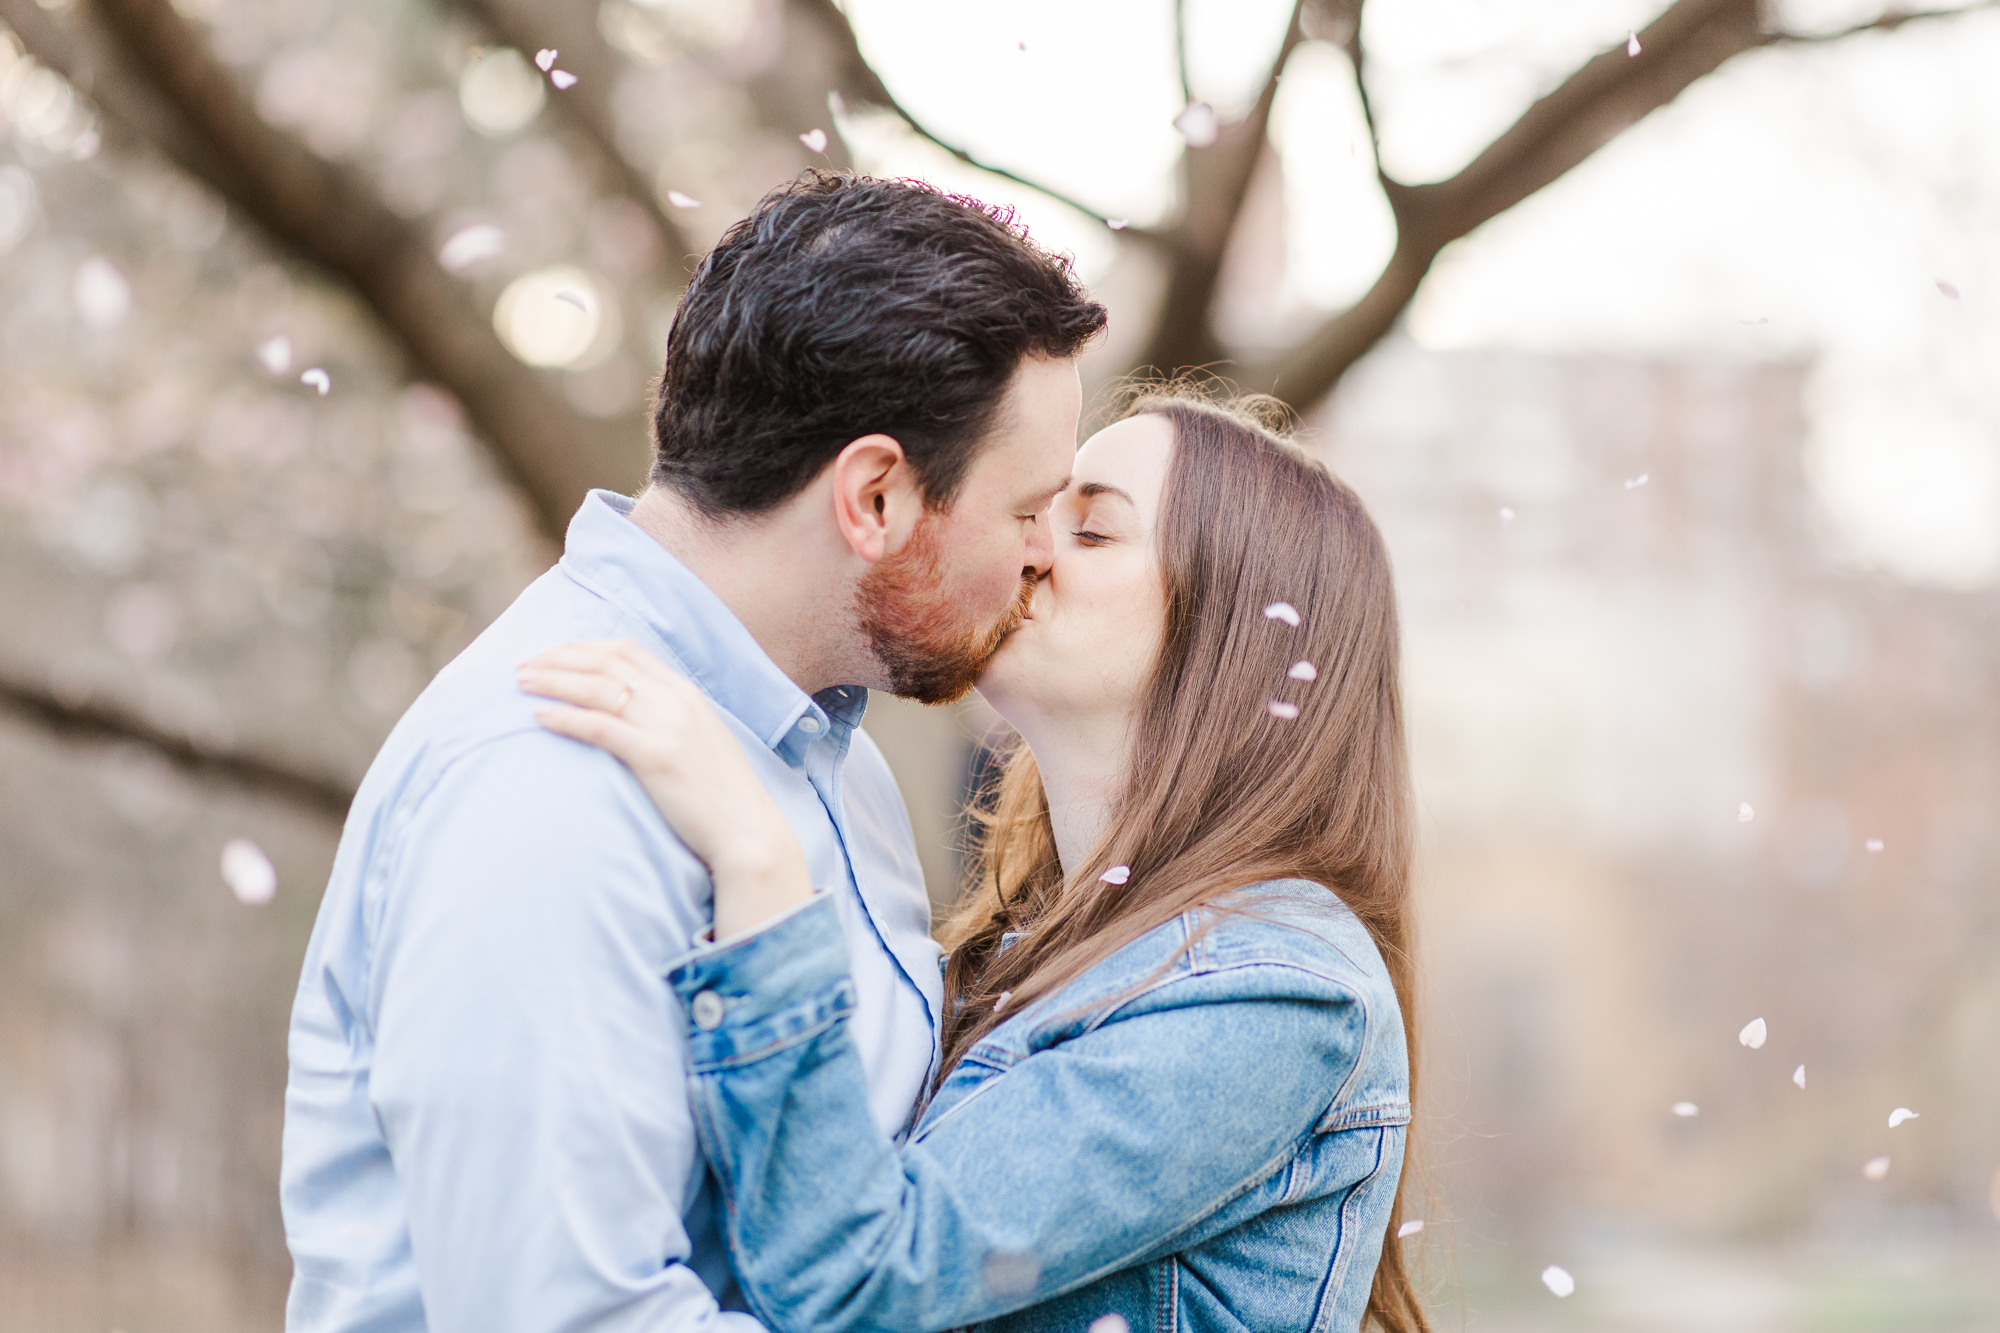 Candid Boathouse Engagement Photos In Prospect Park